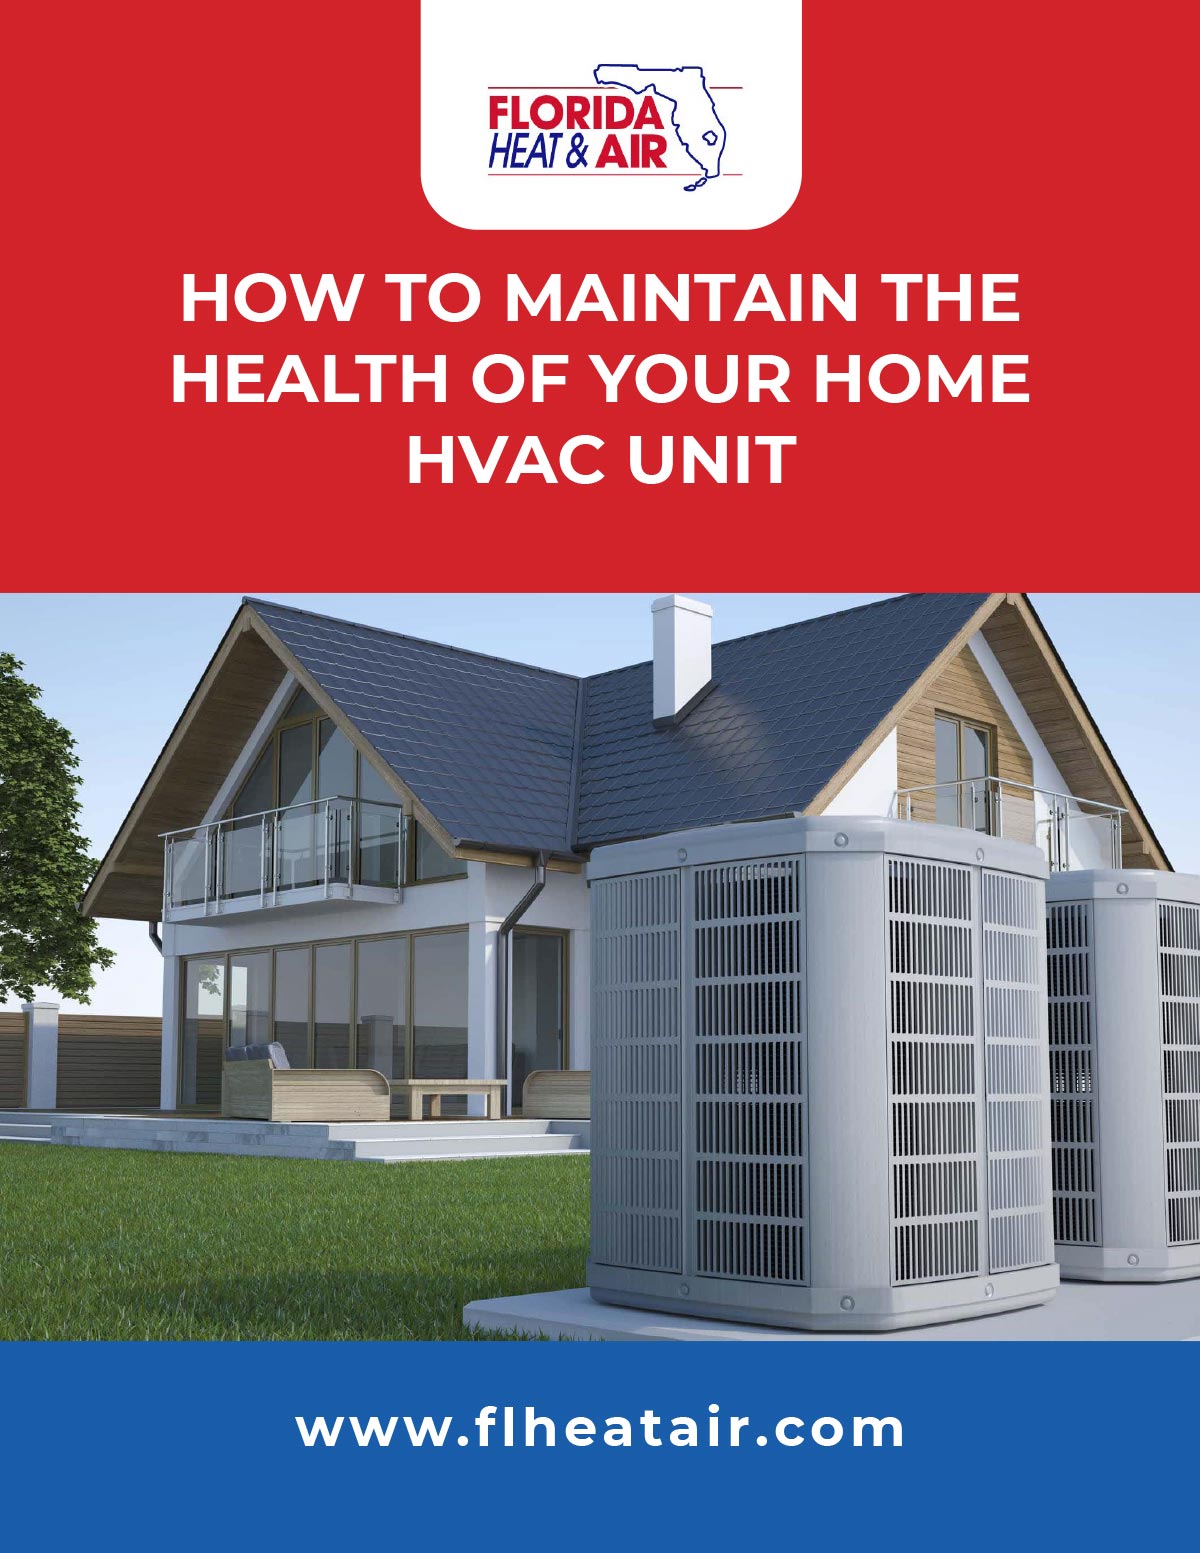 How To Maintain The Health of Your Home HVAC Unit